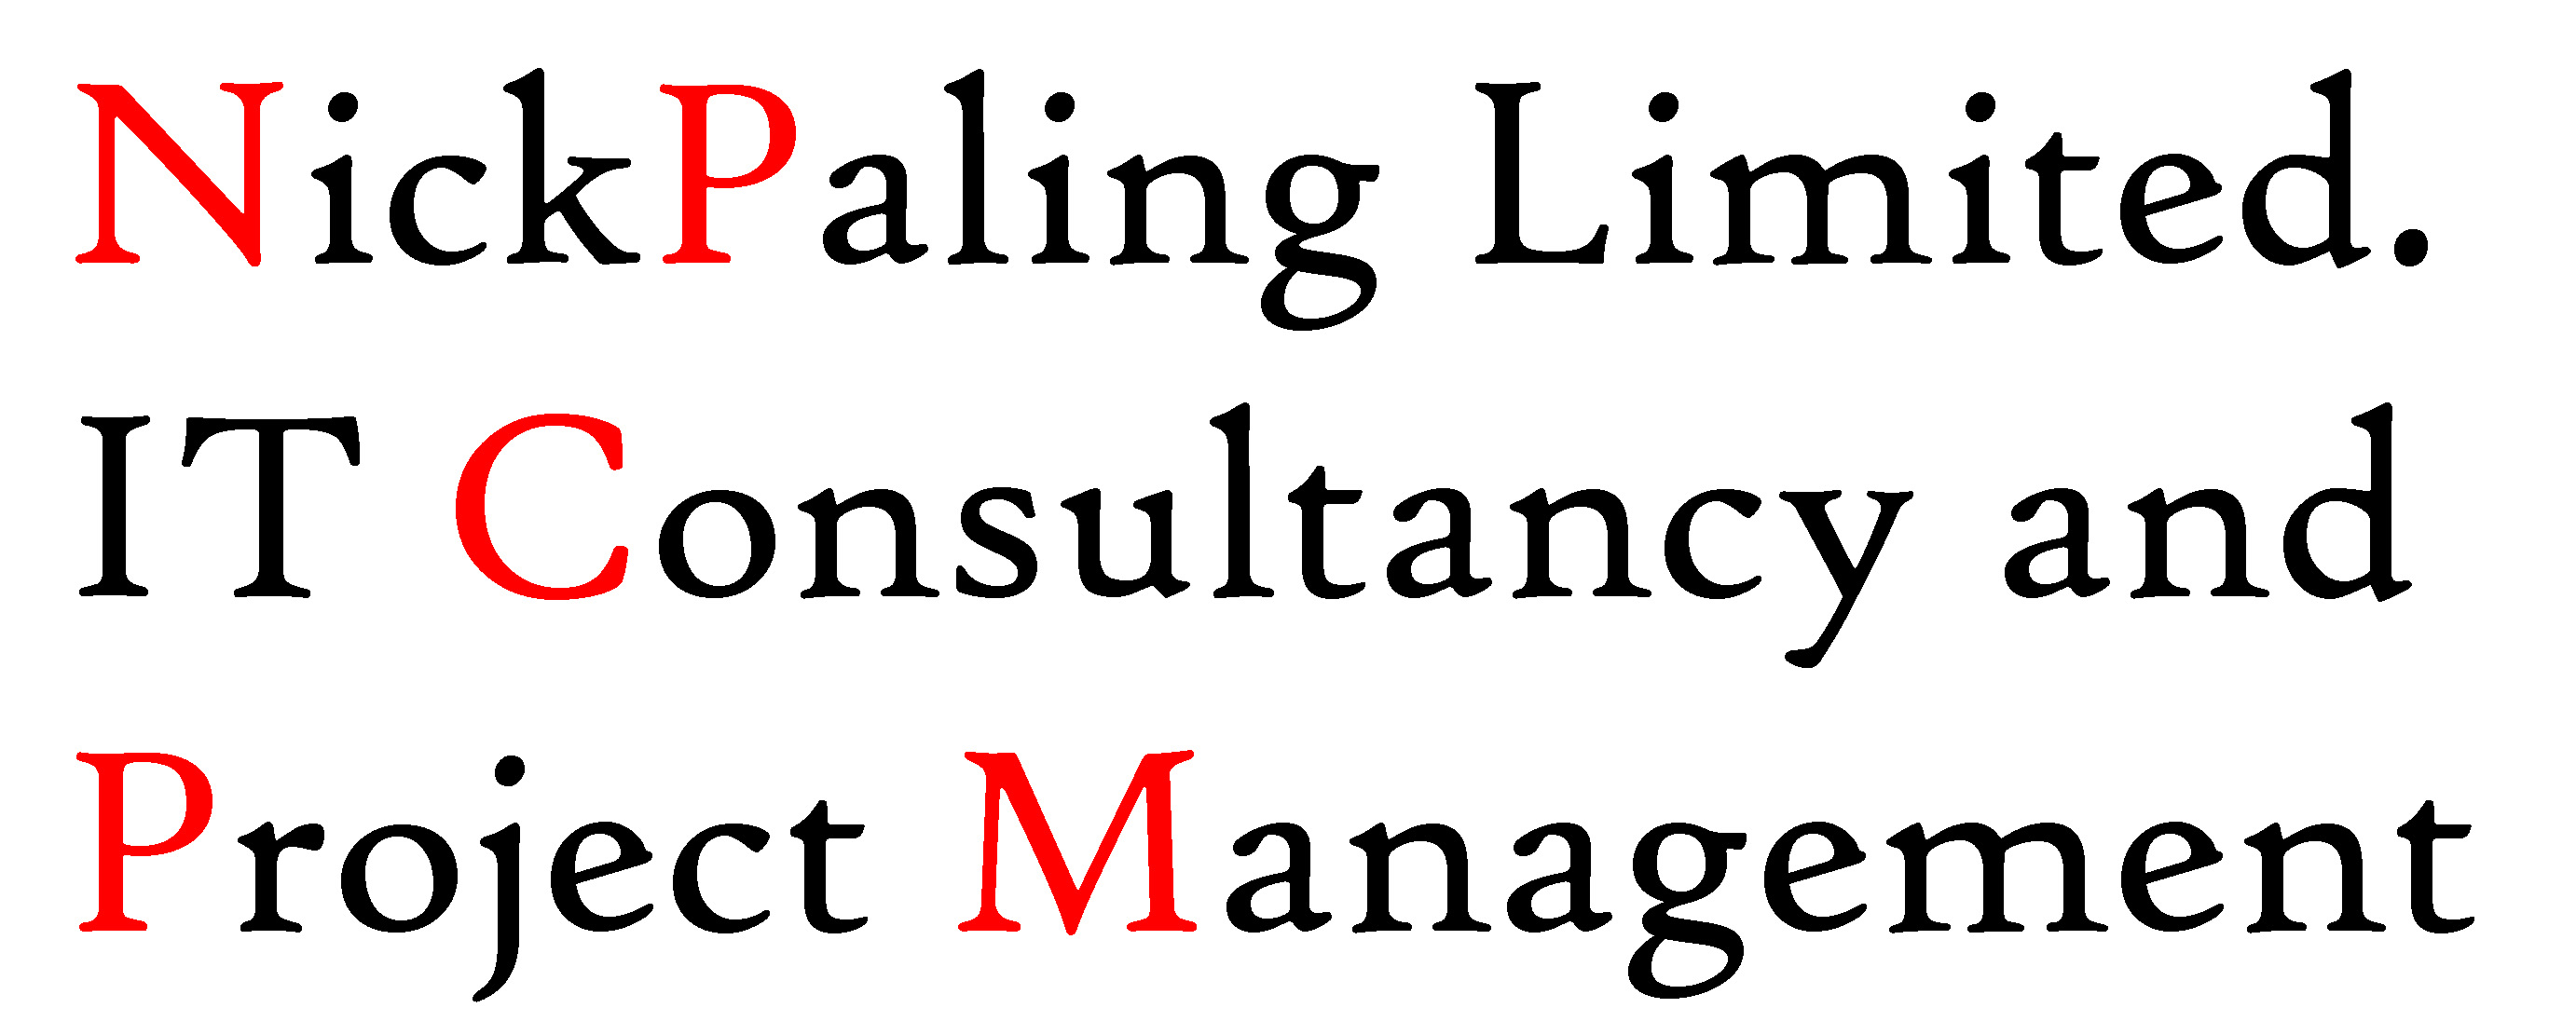 NickPaling Ltd, IT Consultancy and Project Management